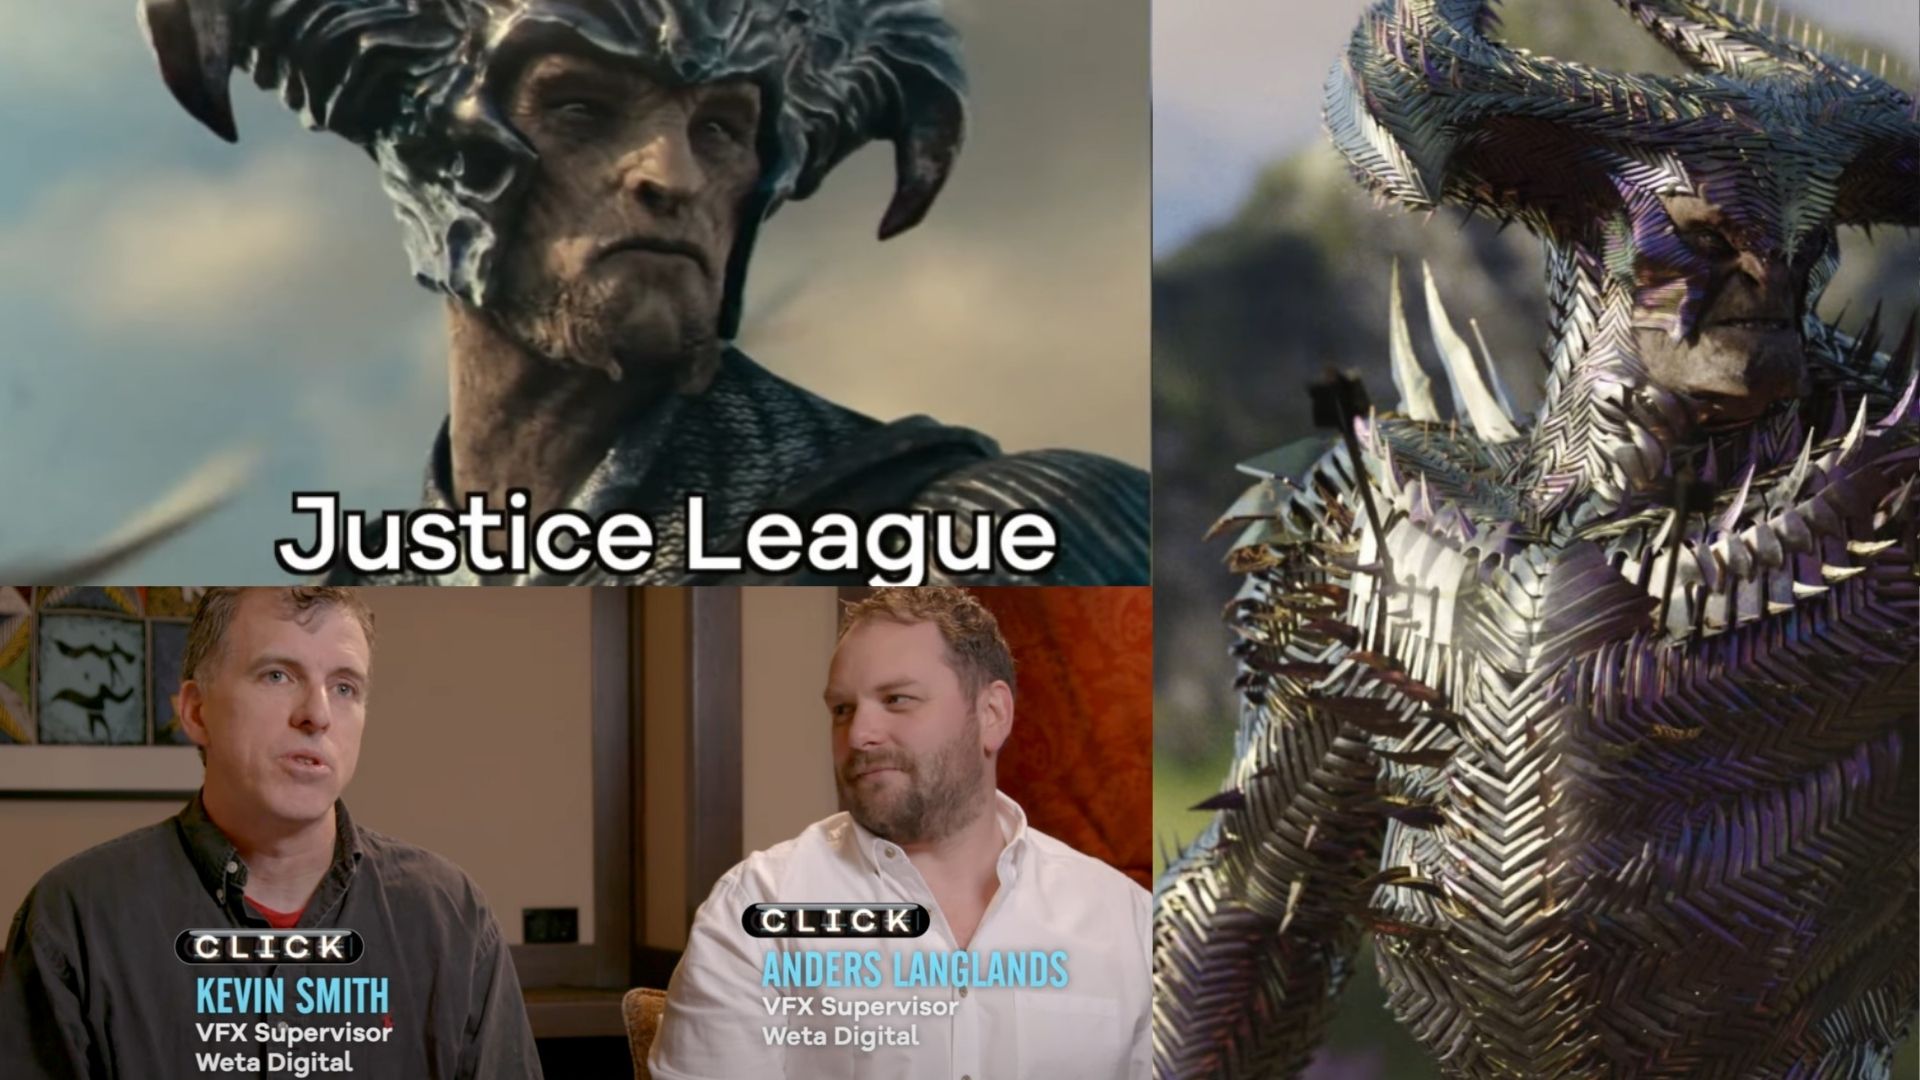 Zack Snyder’s Justice League: VFX changes from the 2017 film